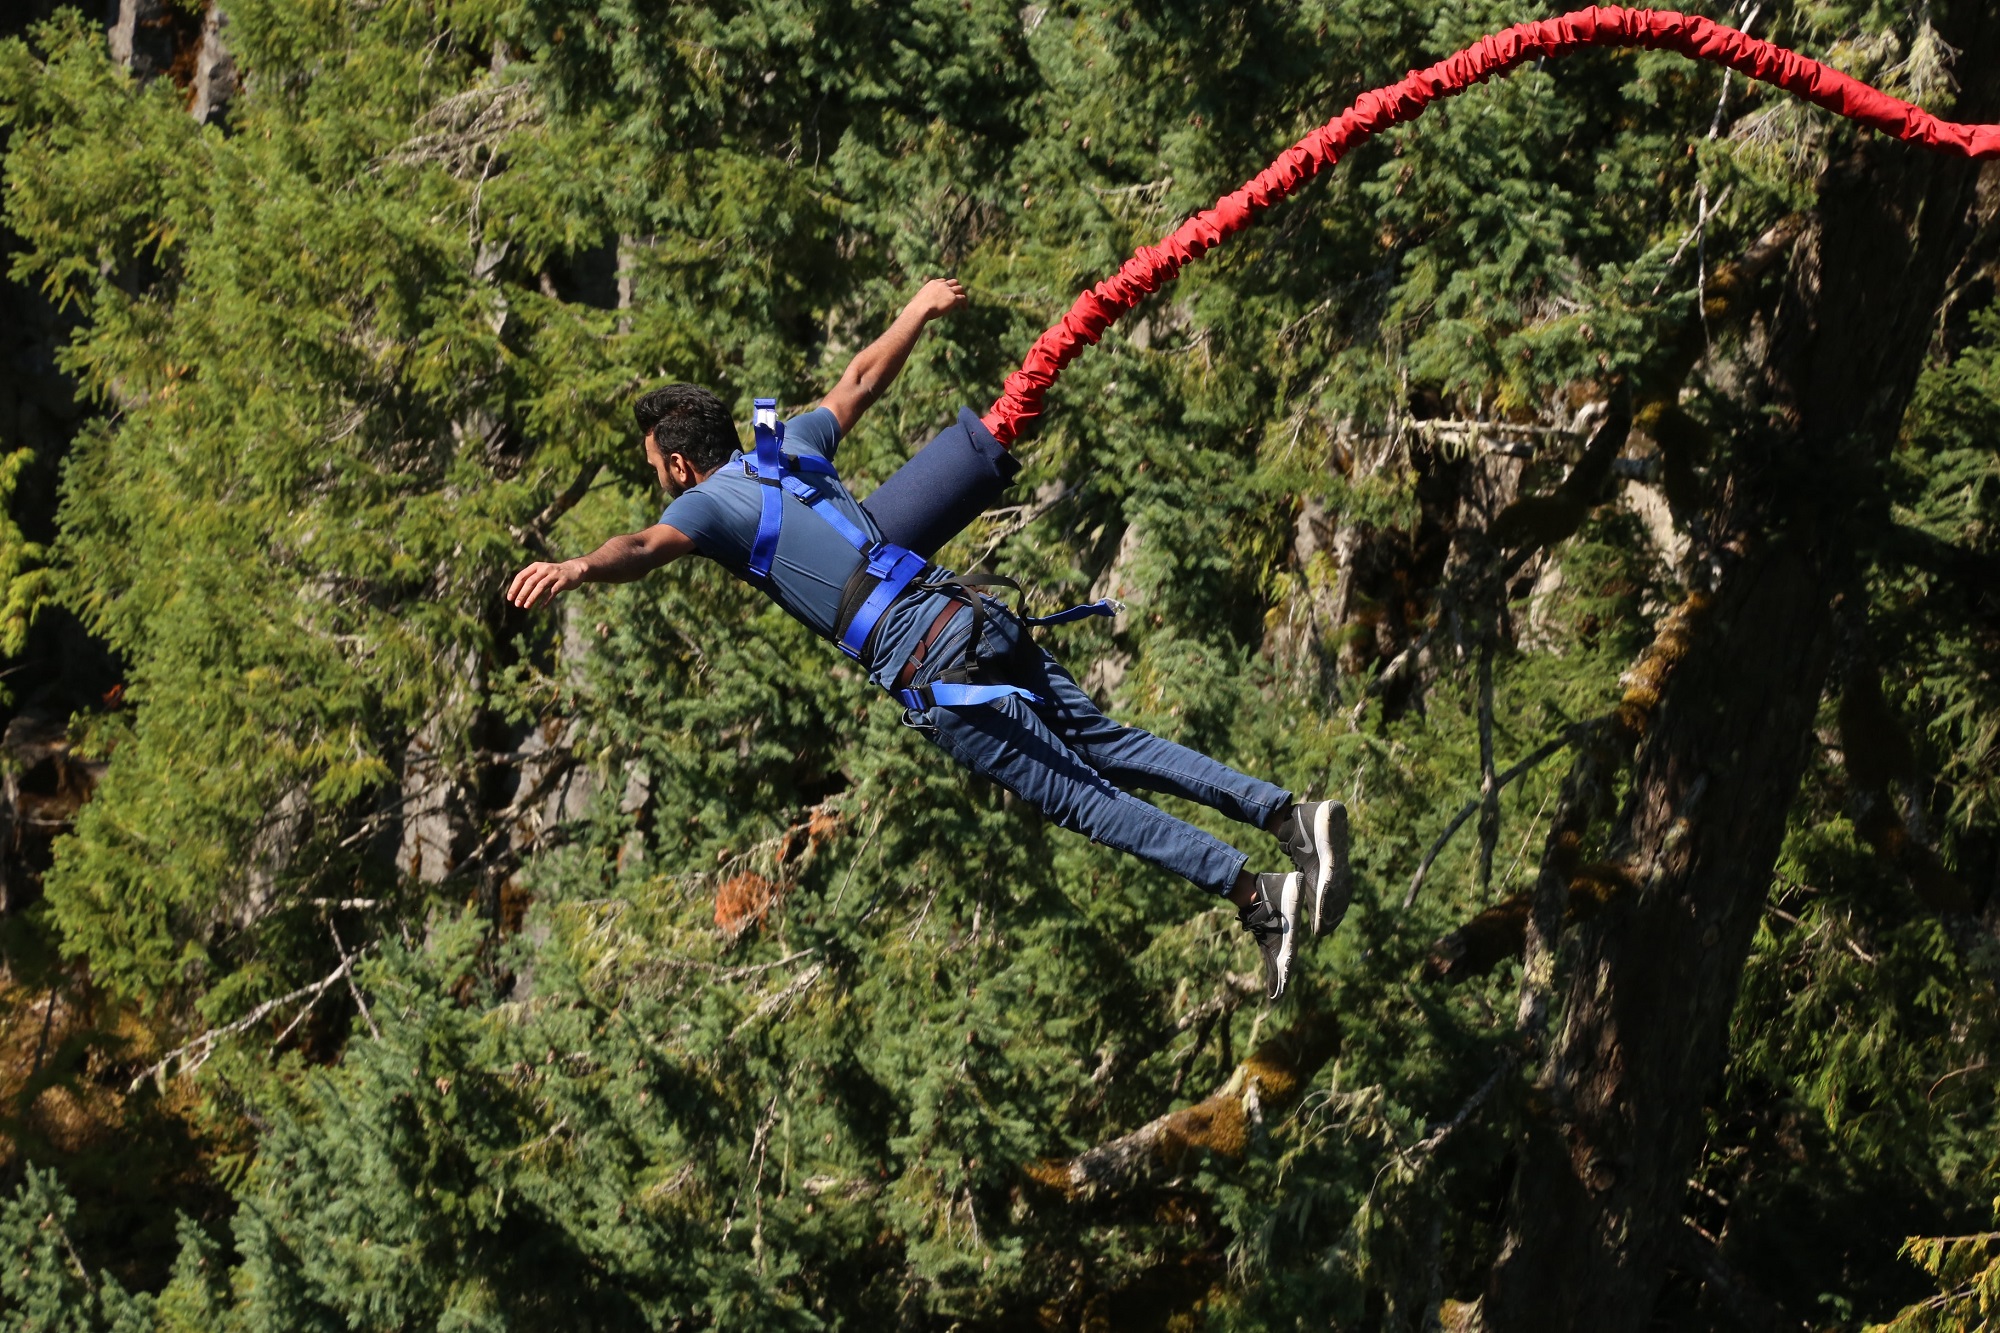 Bungee Jumping is an extreme sport where you feel the thrill from free-falling.